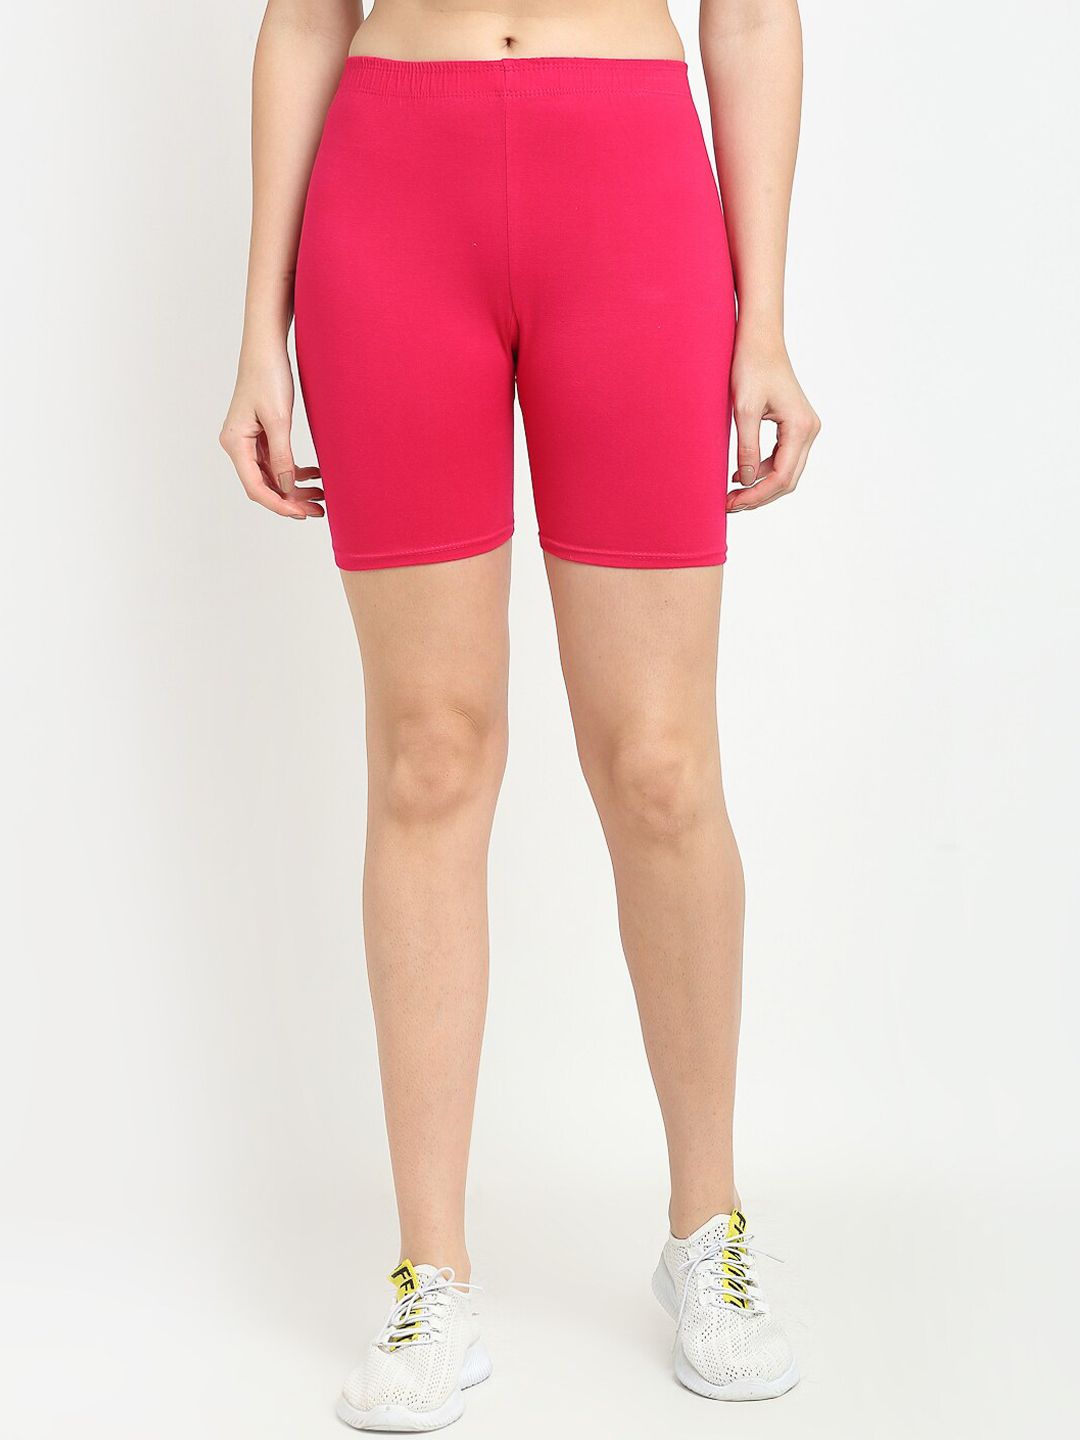 GRACIT Women Pink Cycling Sports Shorts Price in India